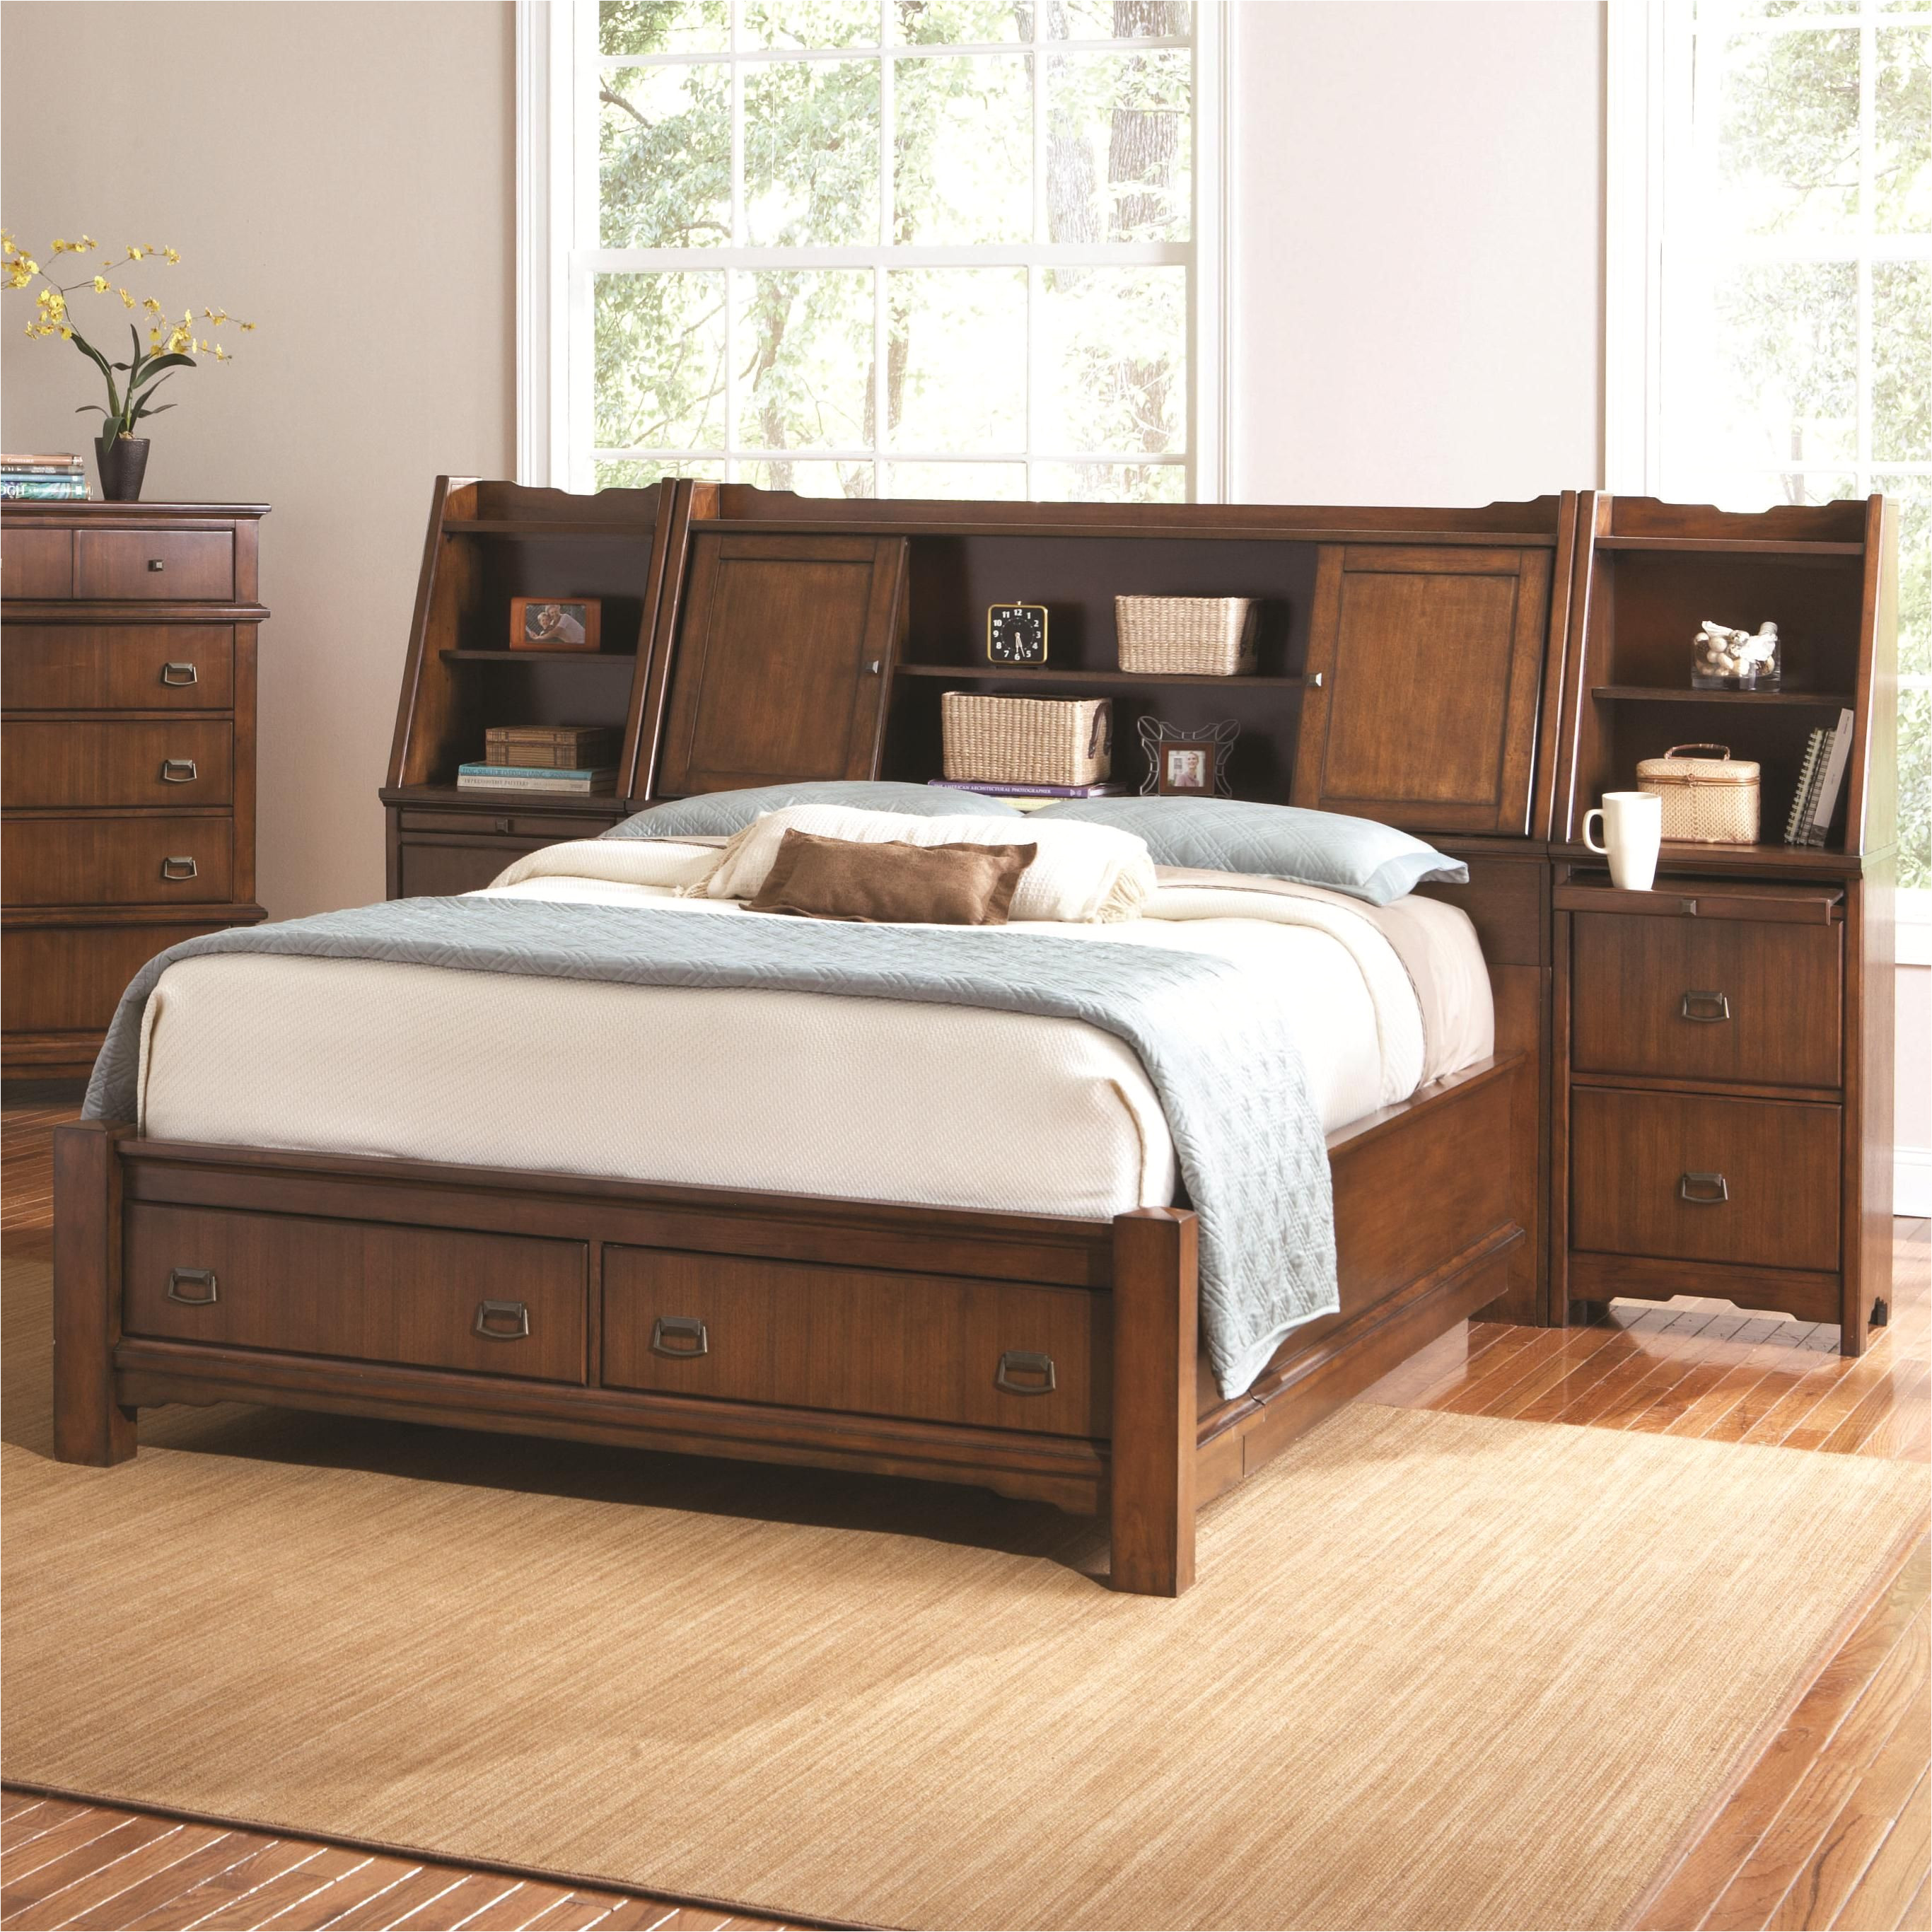 grendel eastern king bookcase bed with footboard storage and hutch headboard by coaster coaster bookcase bed